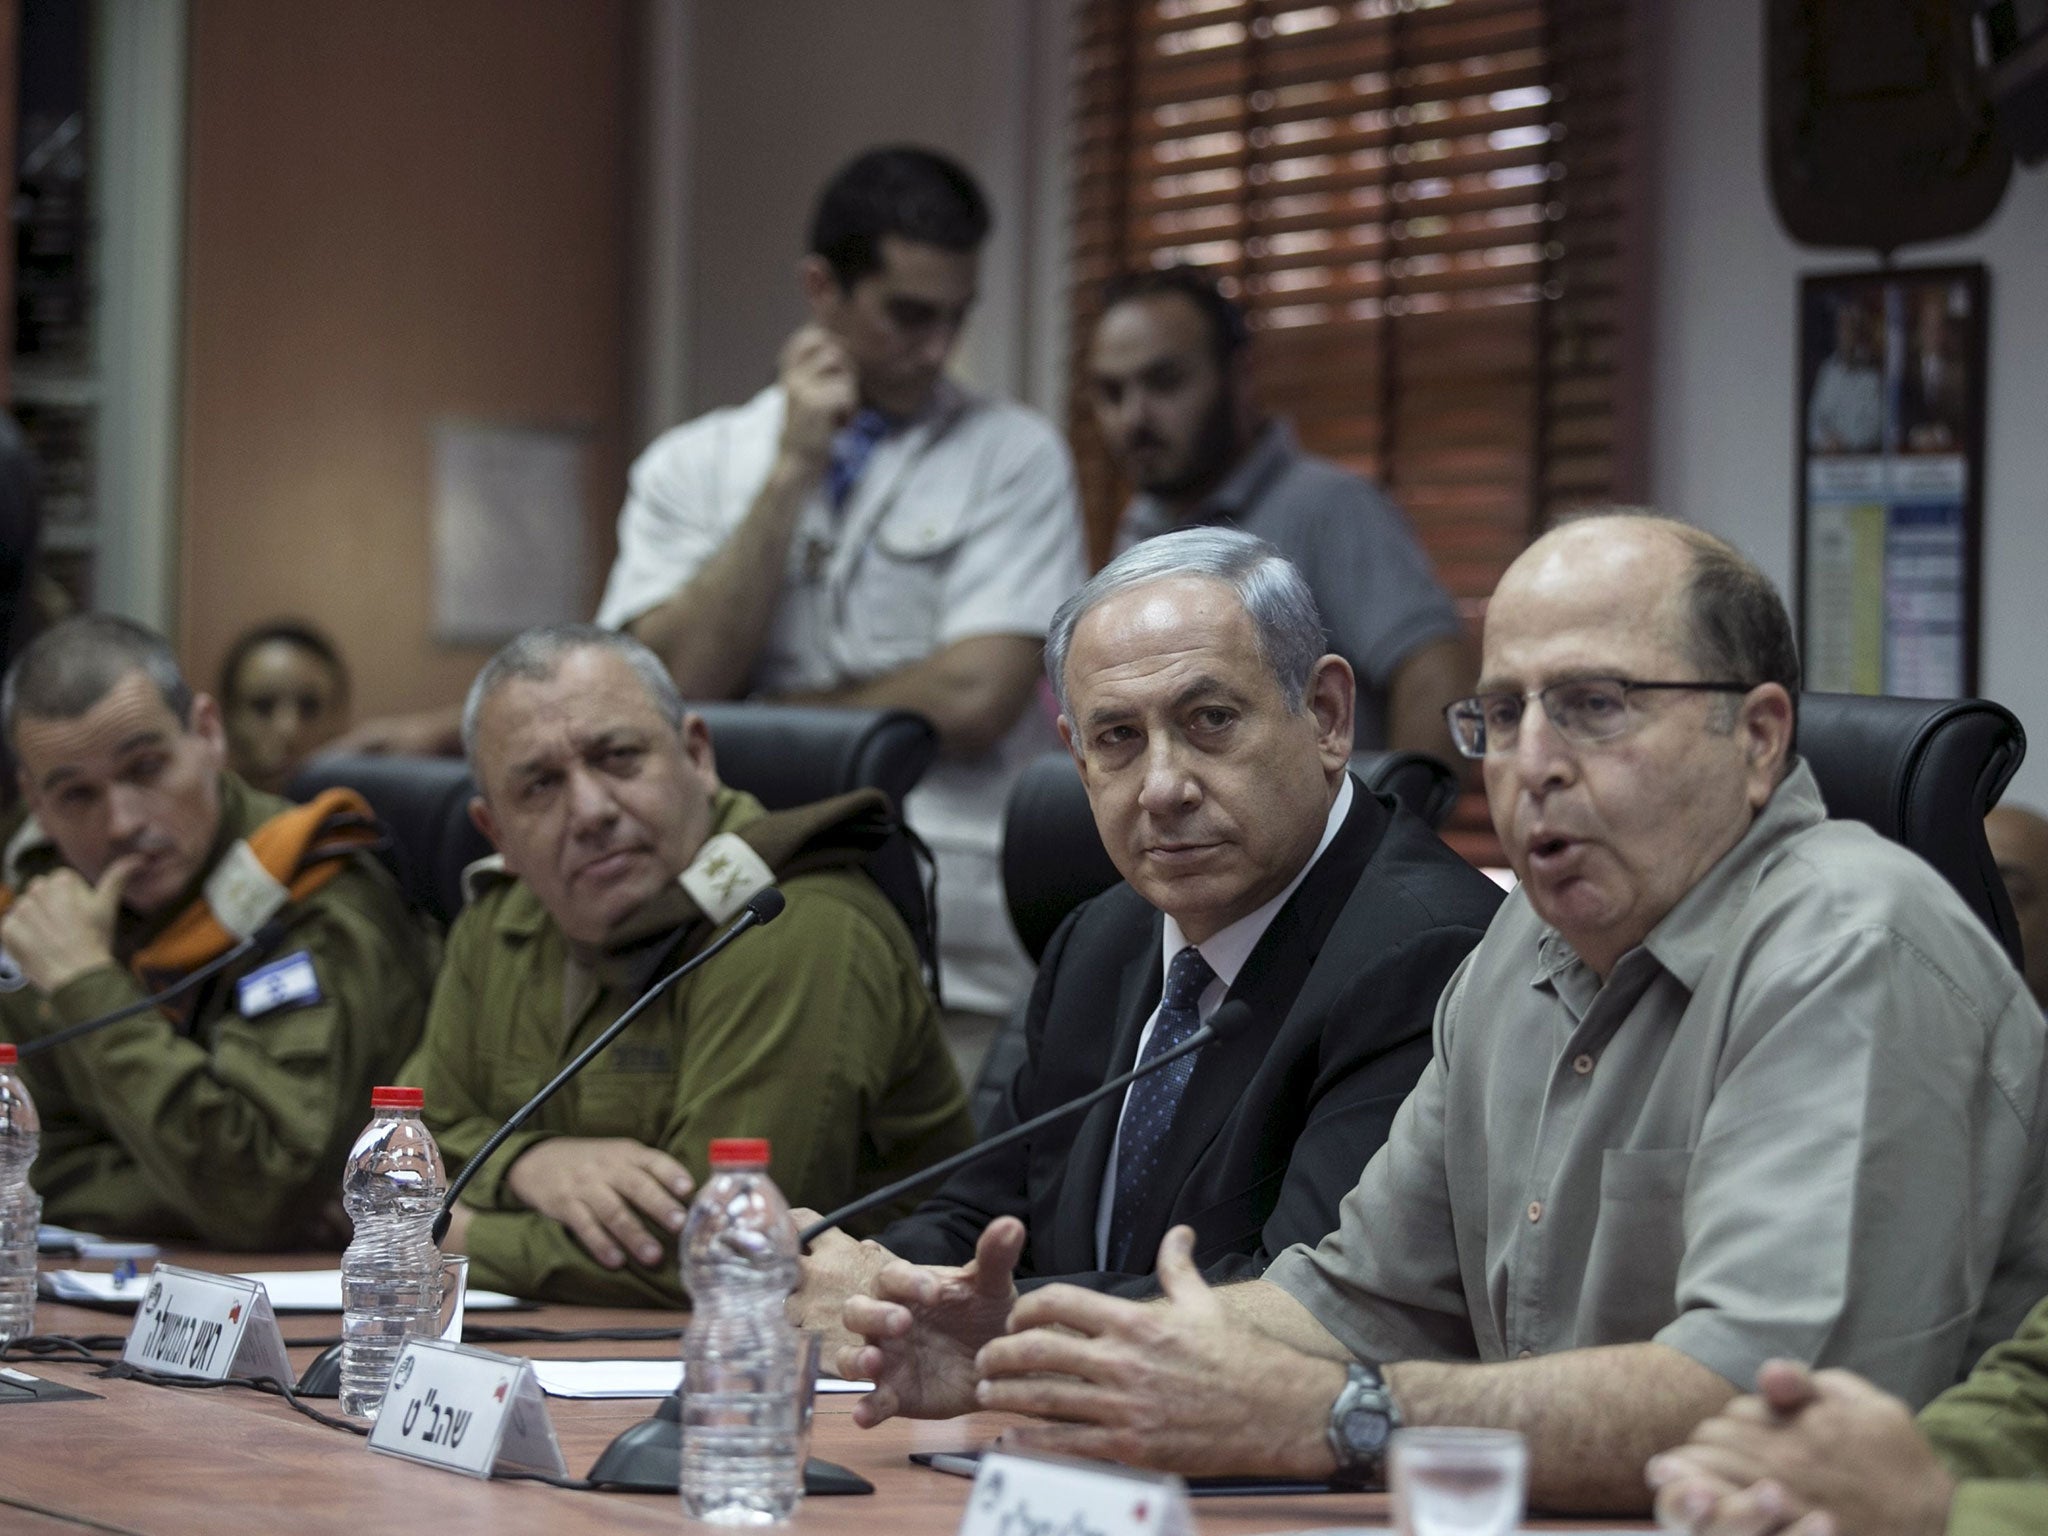 Israel's Prime Minister Benjamin Netanyahu (C) and Defence Minister Moshe Yaalon (R) attend a briefing on 2 June, 2015